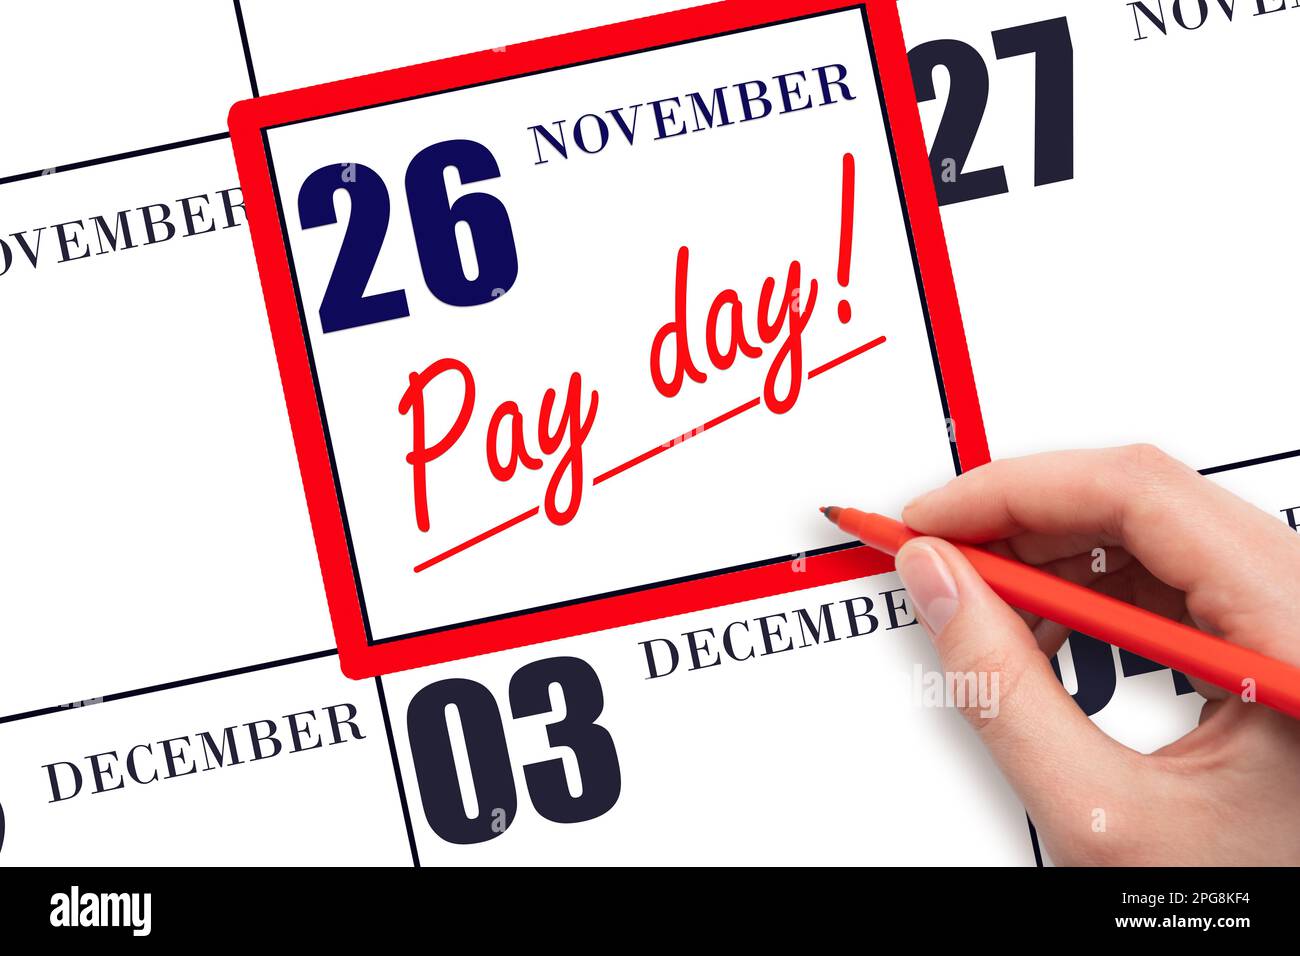 26th day of November. Hand writing text PAY DATE on calendar date November 26 and underline it. Payment due date. Reminder concept of payment. Autumn Stock Photo